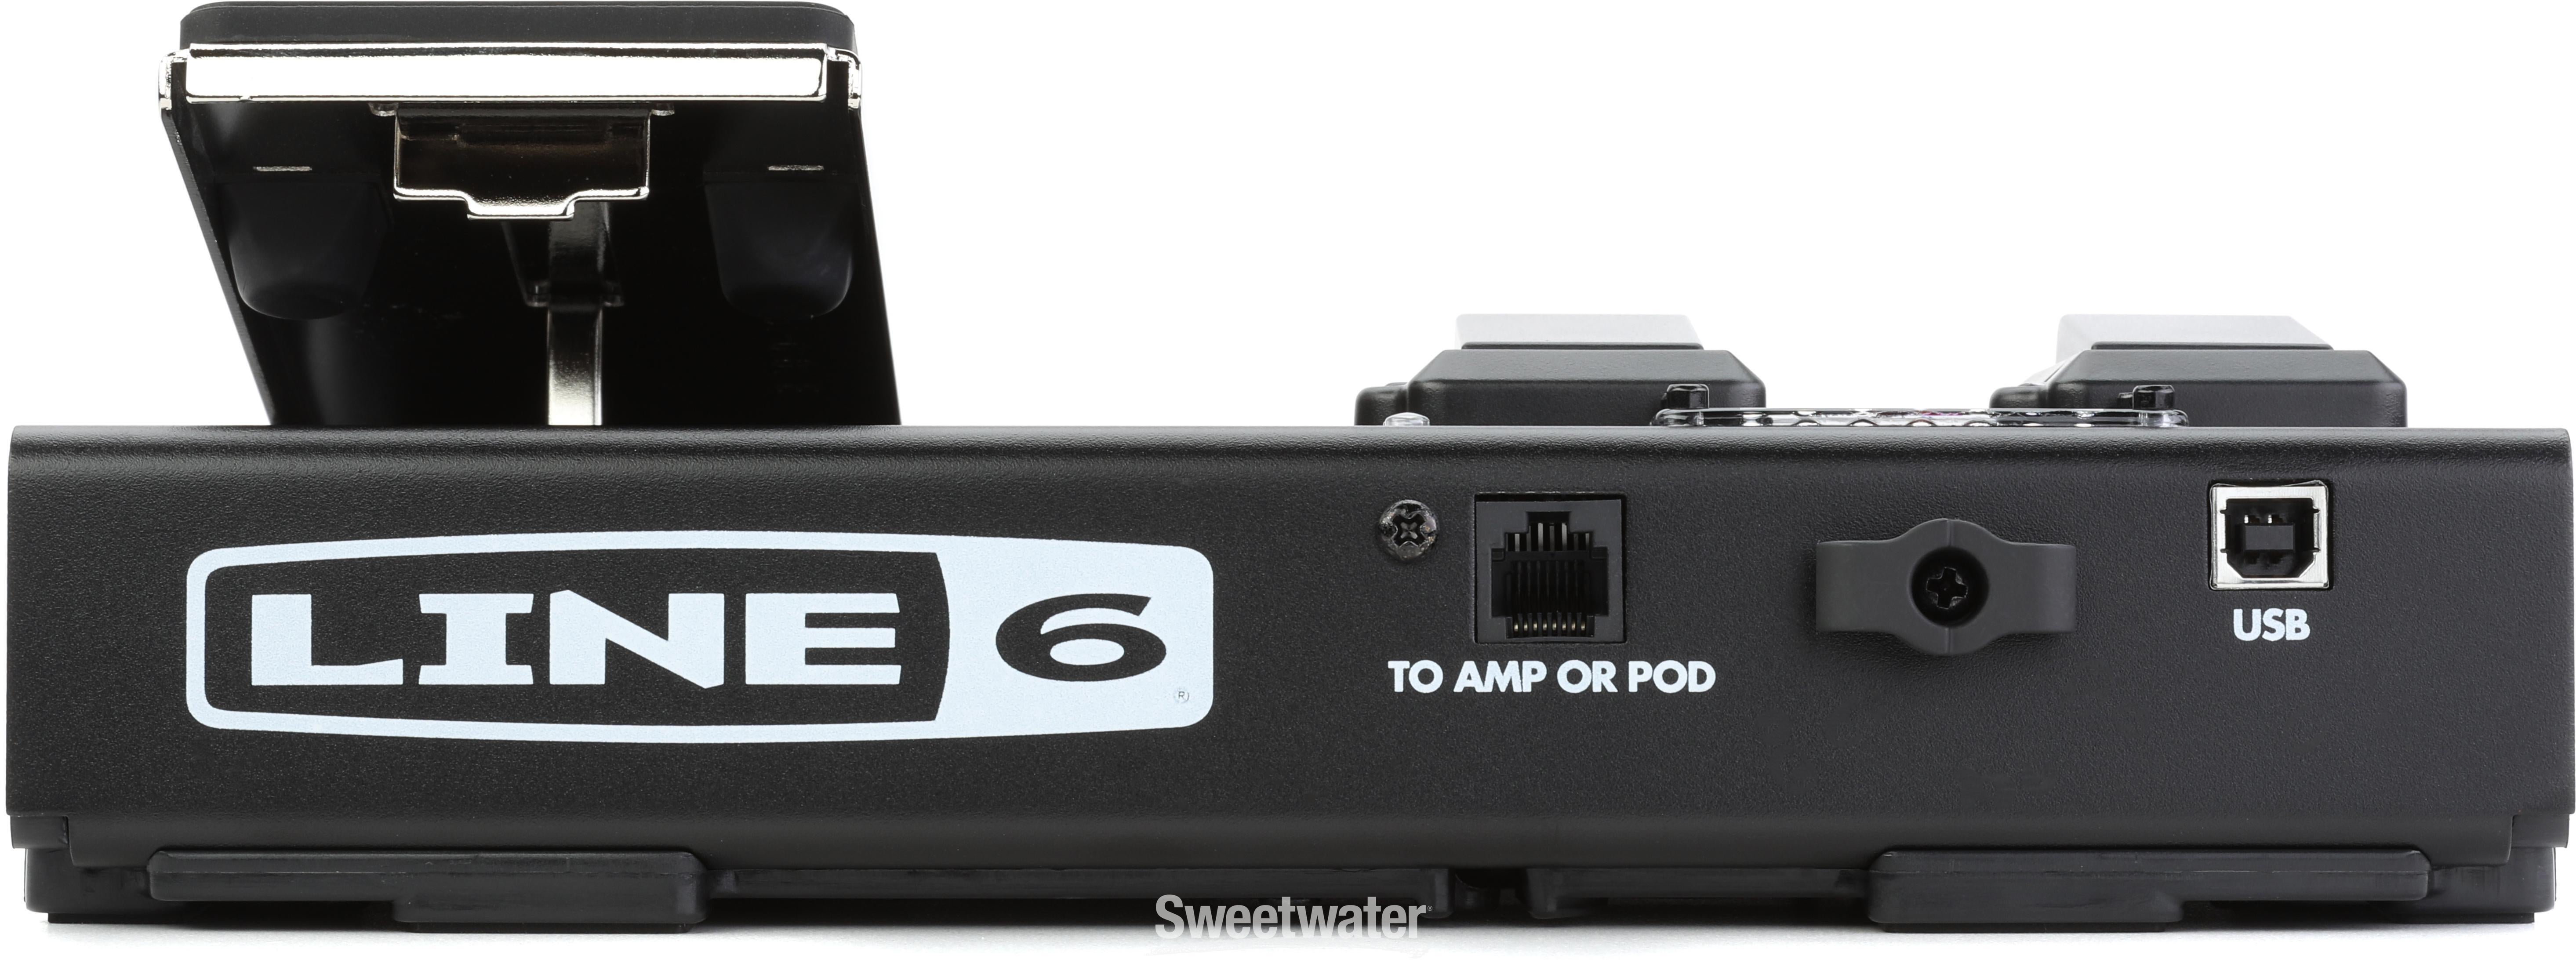 Line 6 FBV Express MkII 4-channel Foot Controller | Sweetwater